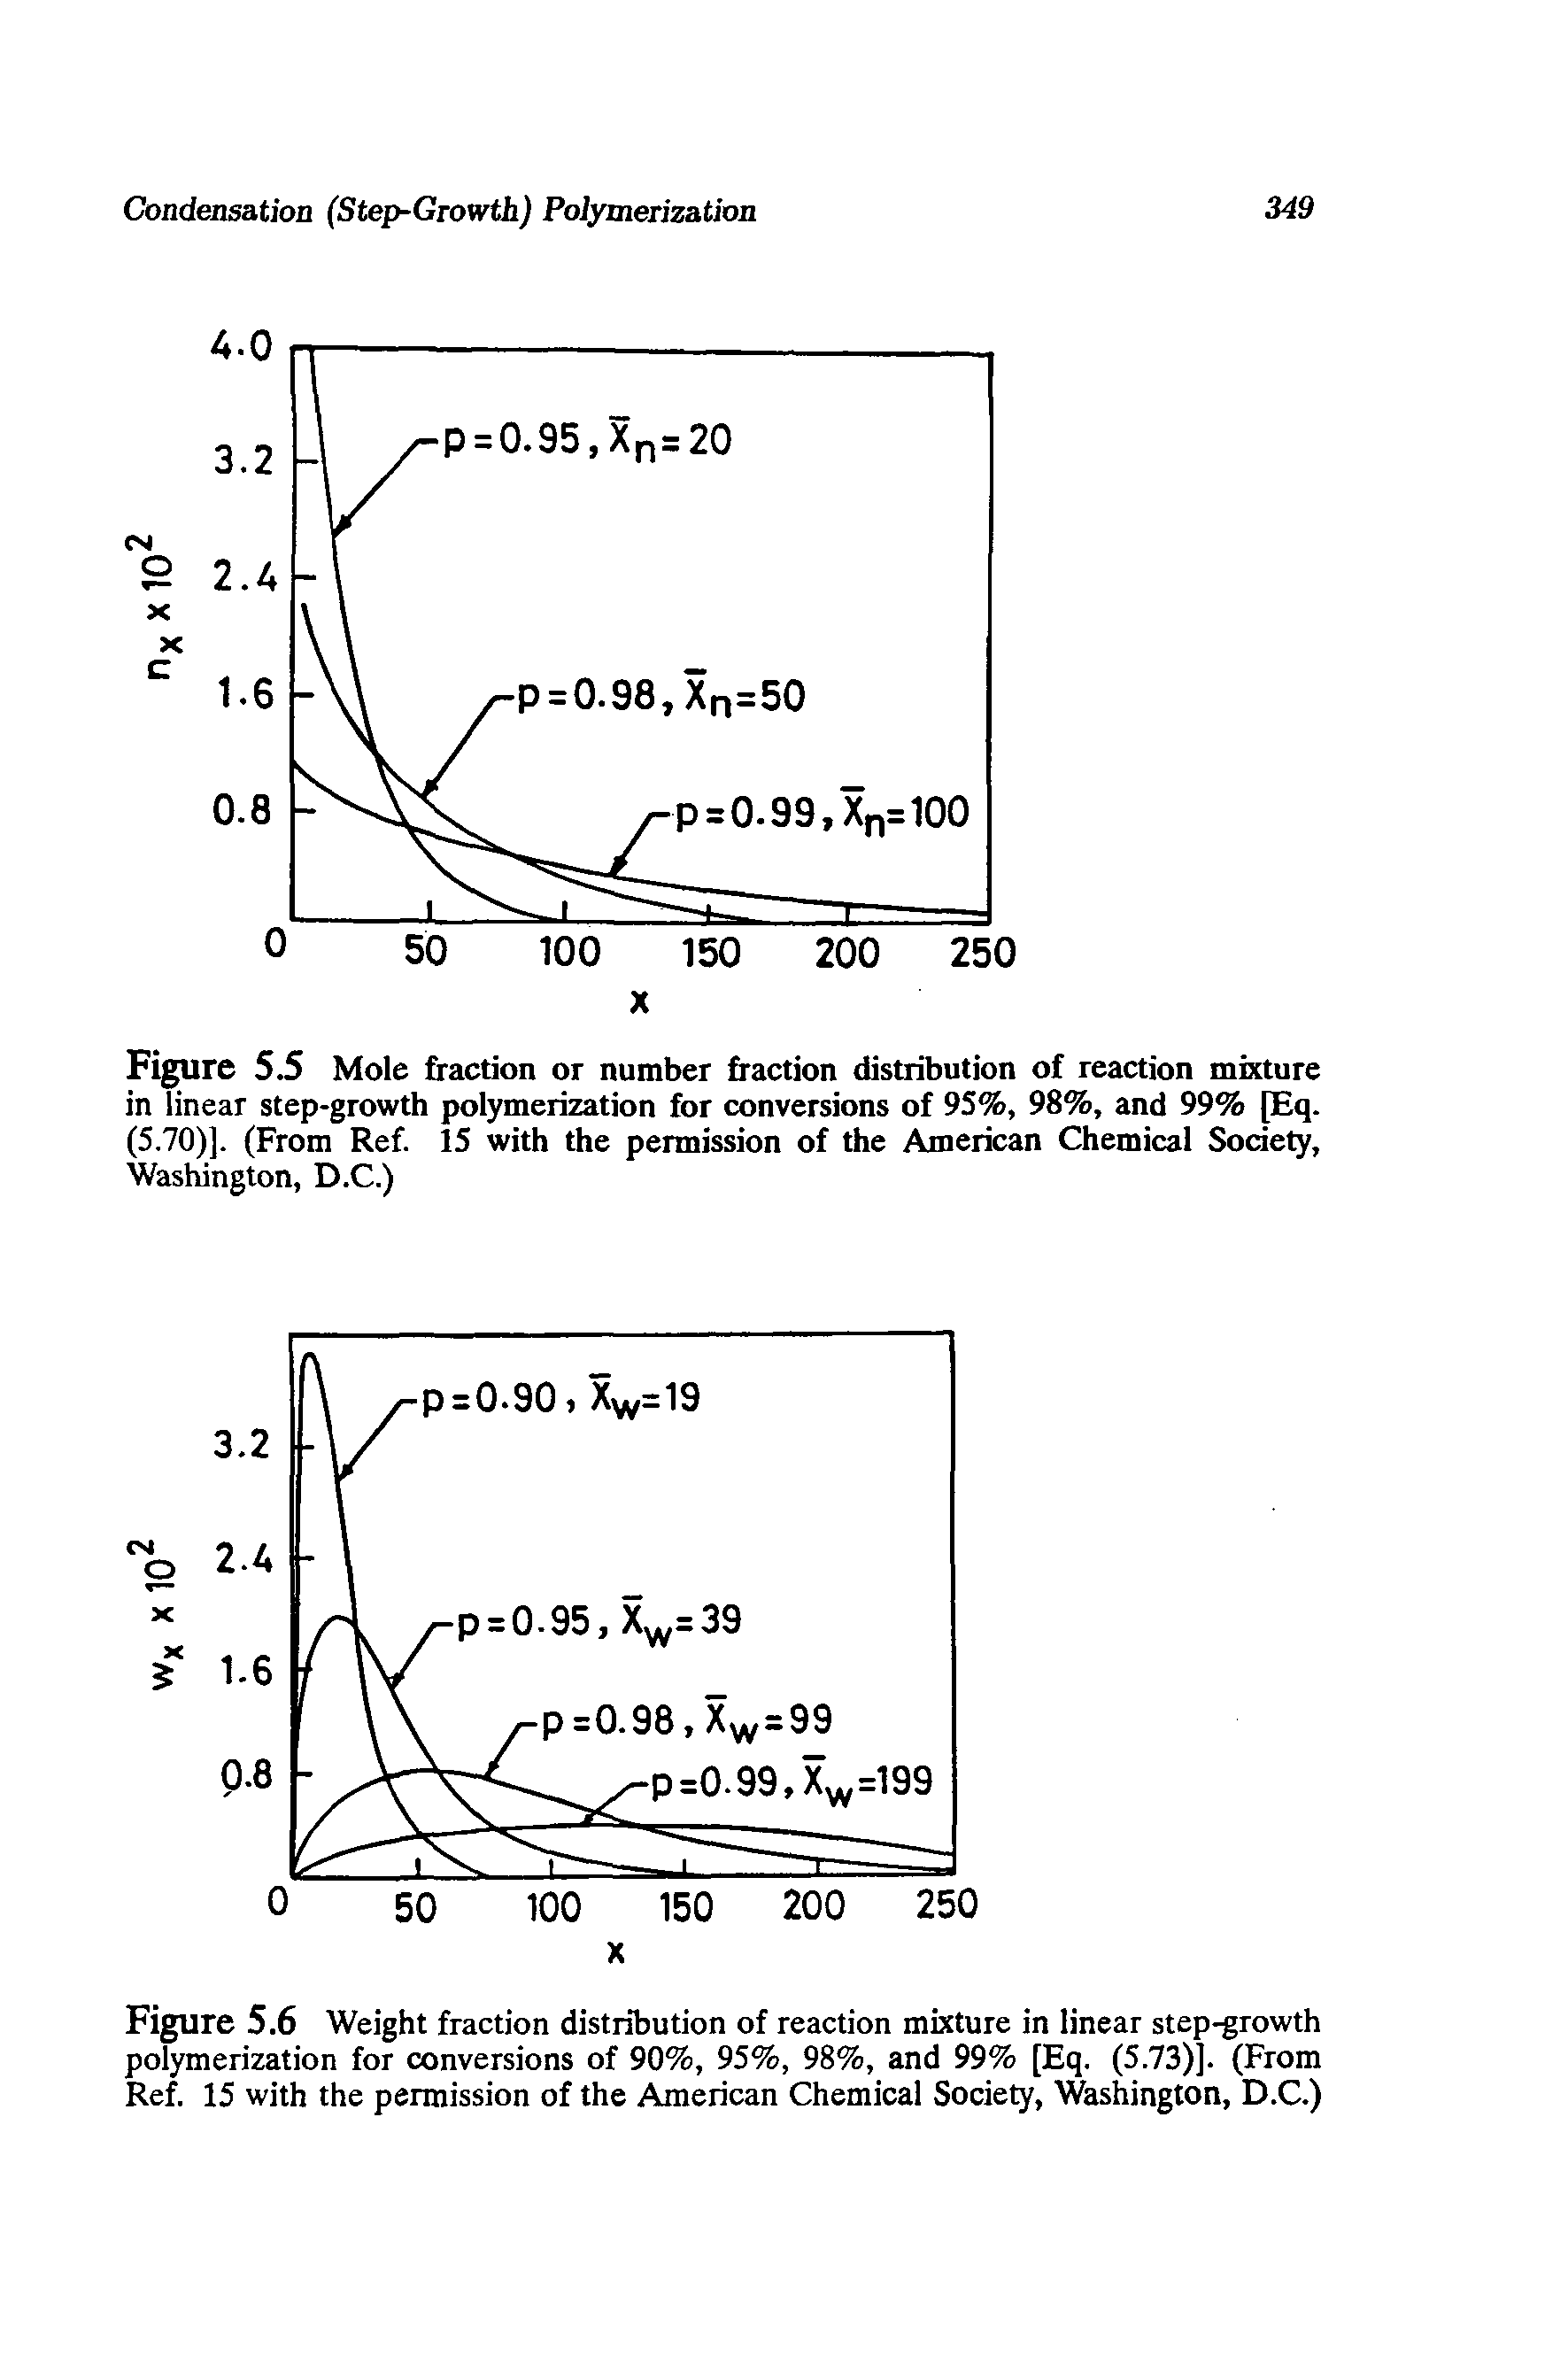 Figure 5.5 Mole fraction or number fraction distribution of reaction mixture in linear step-growth polymerization for conversions of 95%, 98%, and 99% [Eq. (5.70)]. (From Ref. 15 with the permission of the American Chemical Society, Washington, D.C.)...